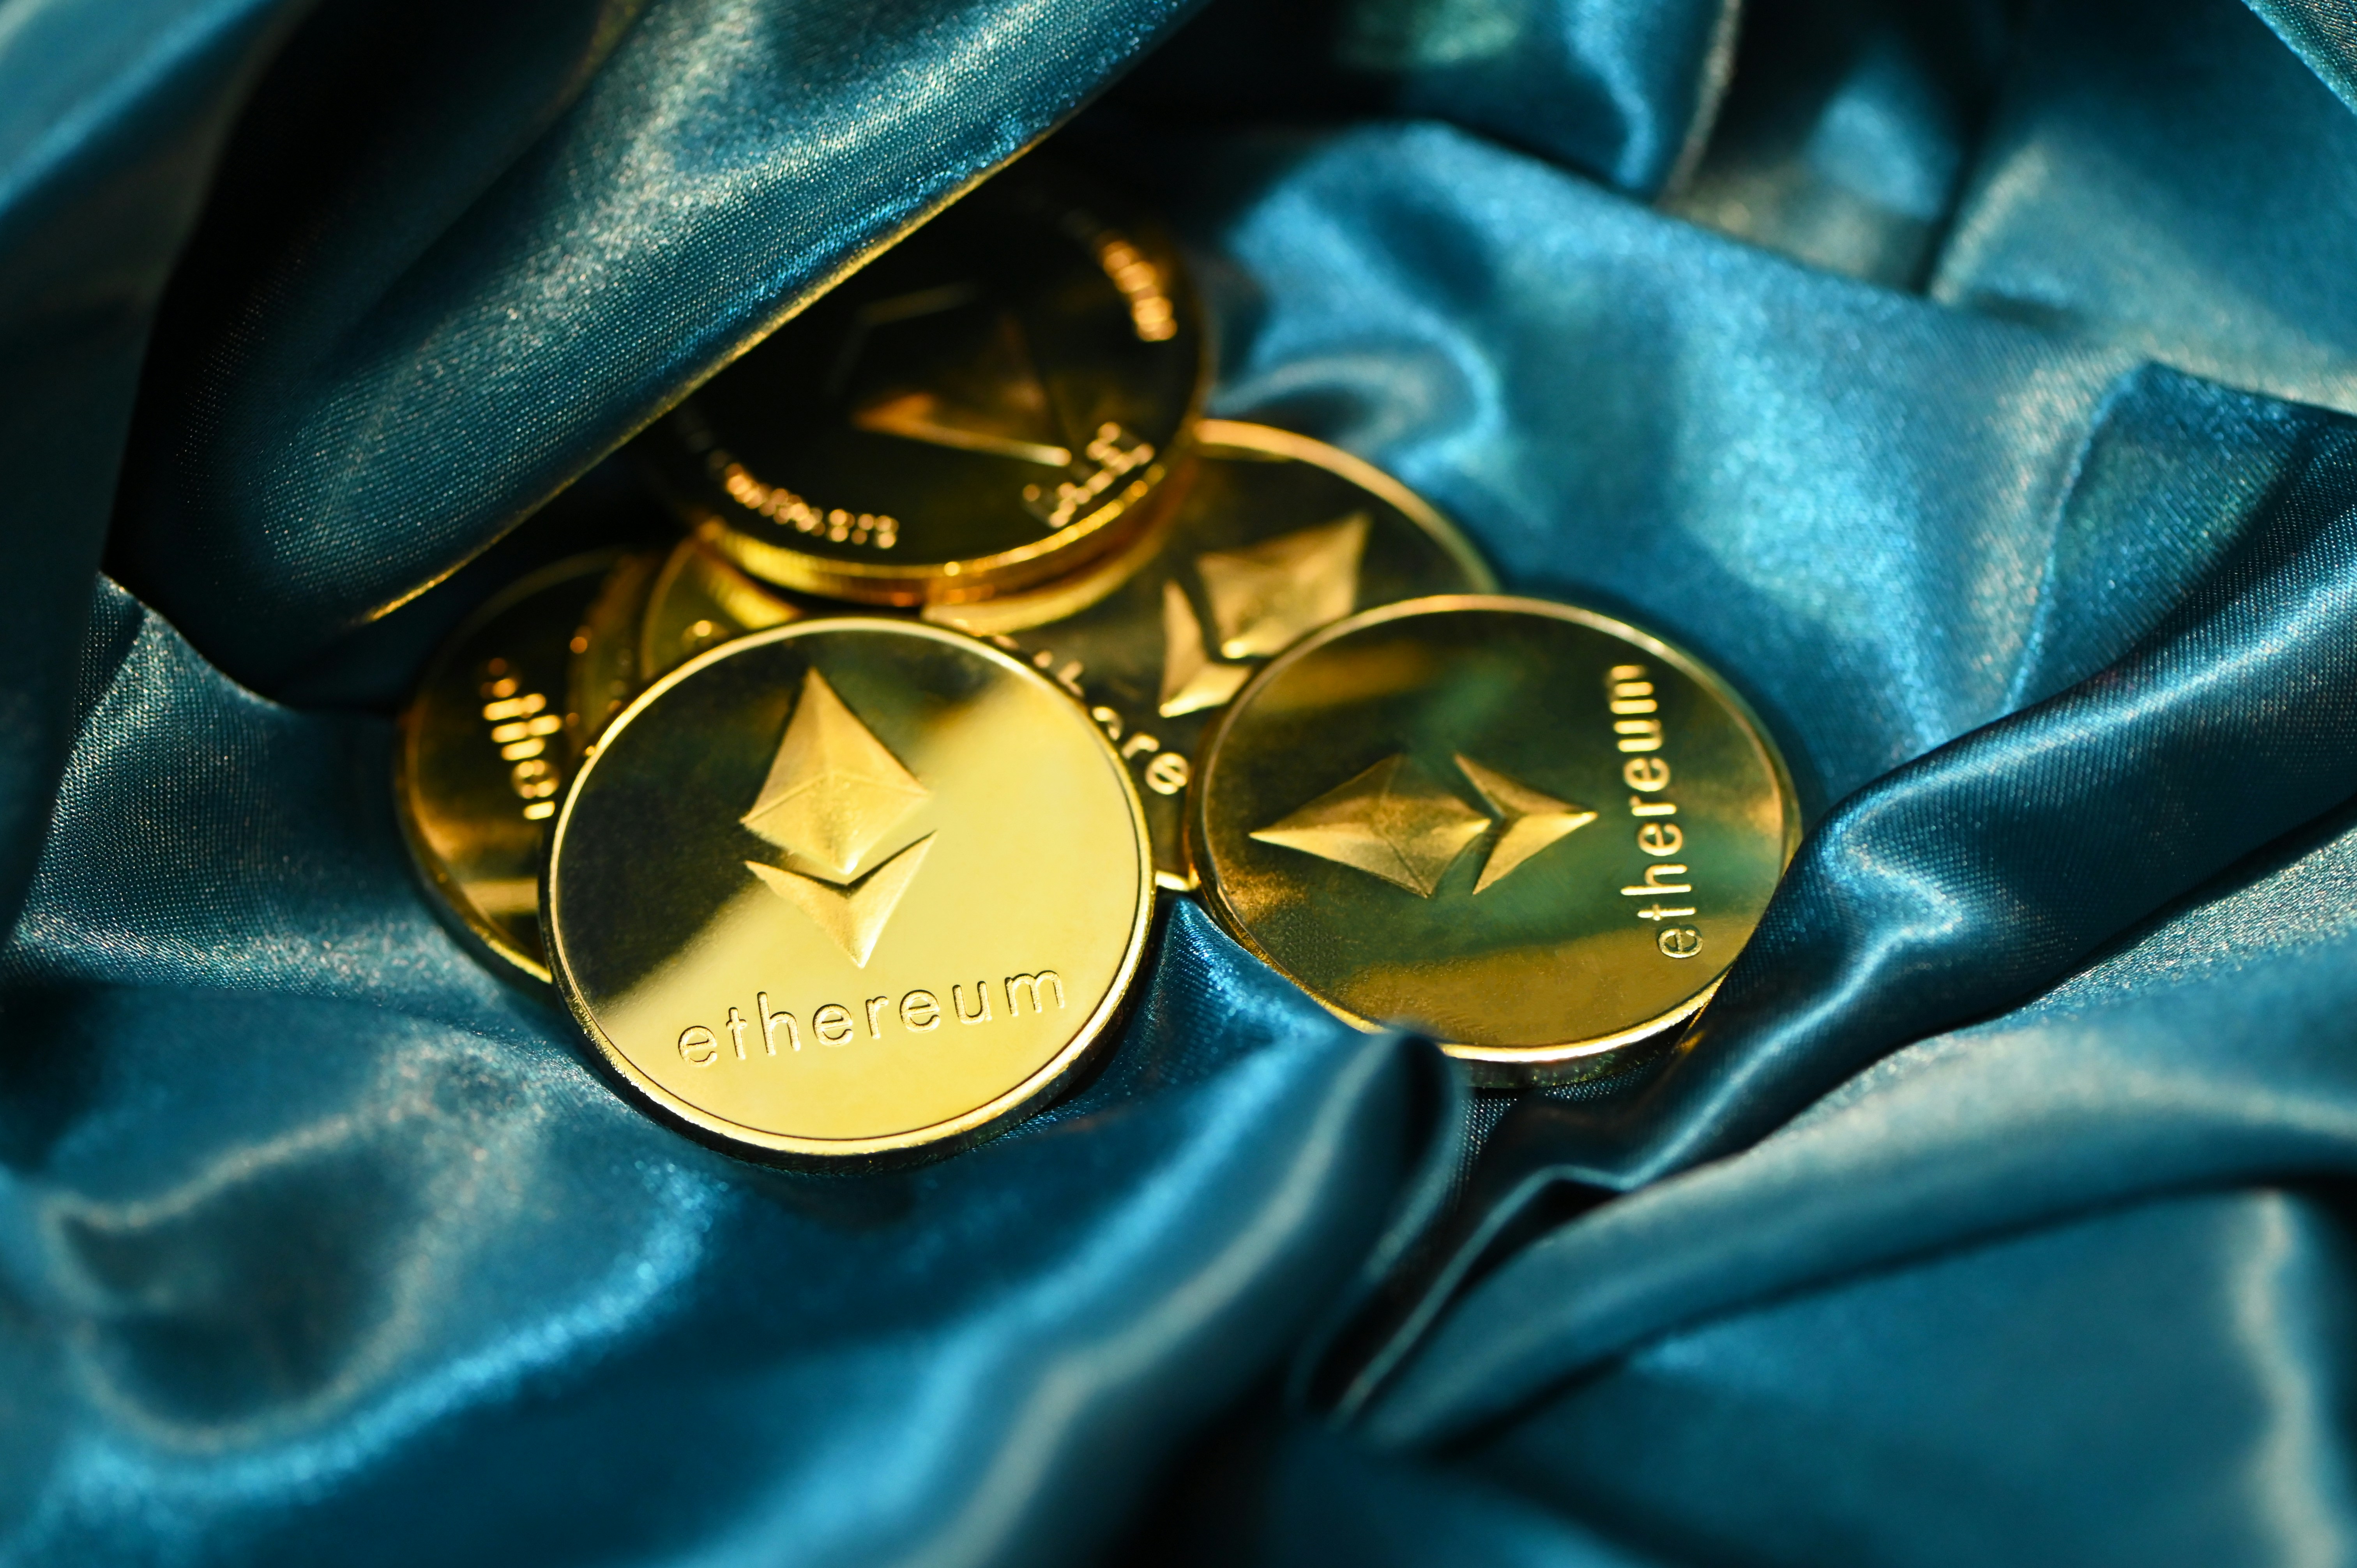 A group of Ethereum coins on a blue fabric